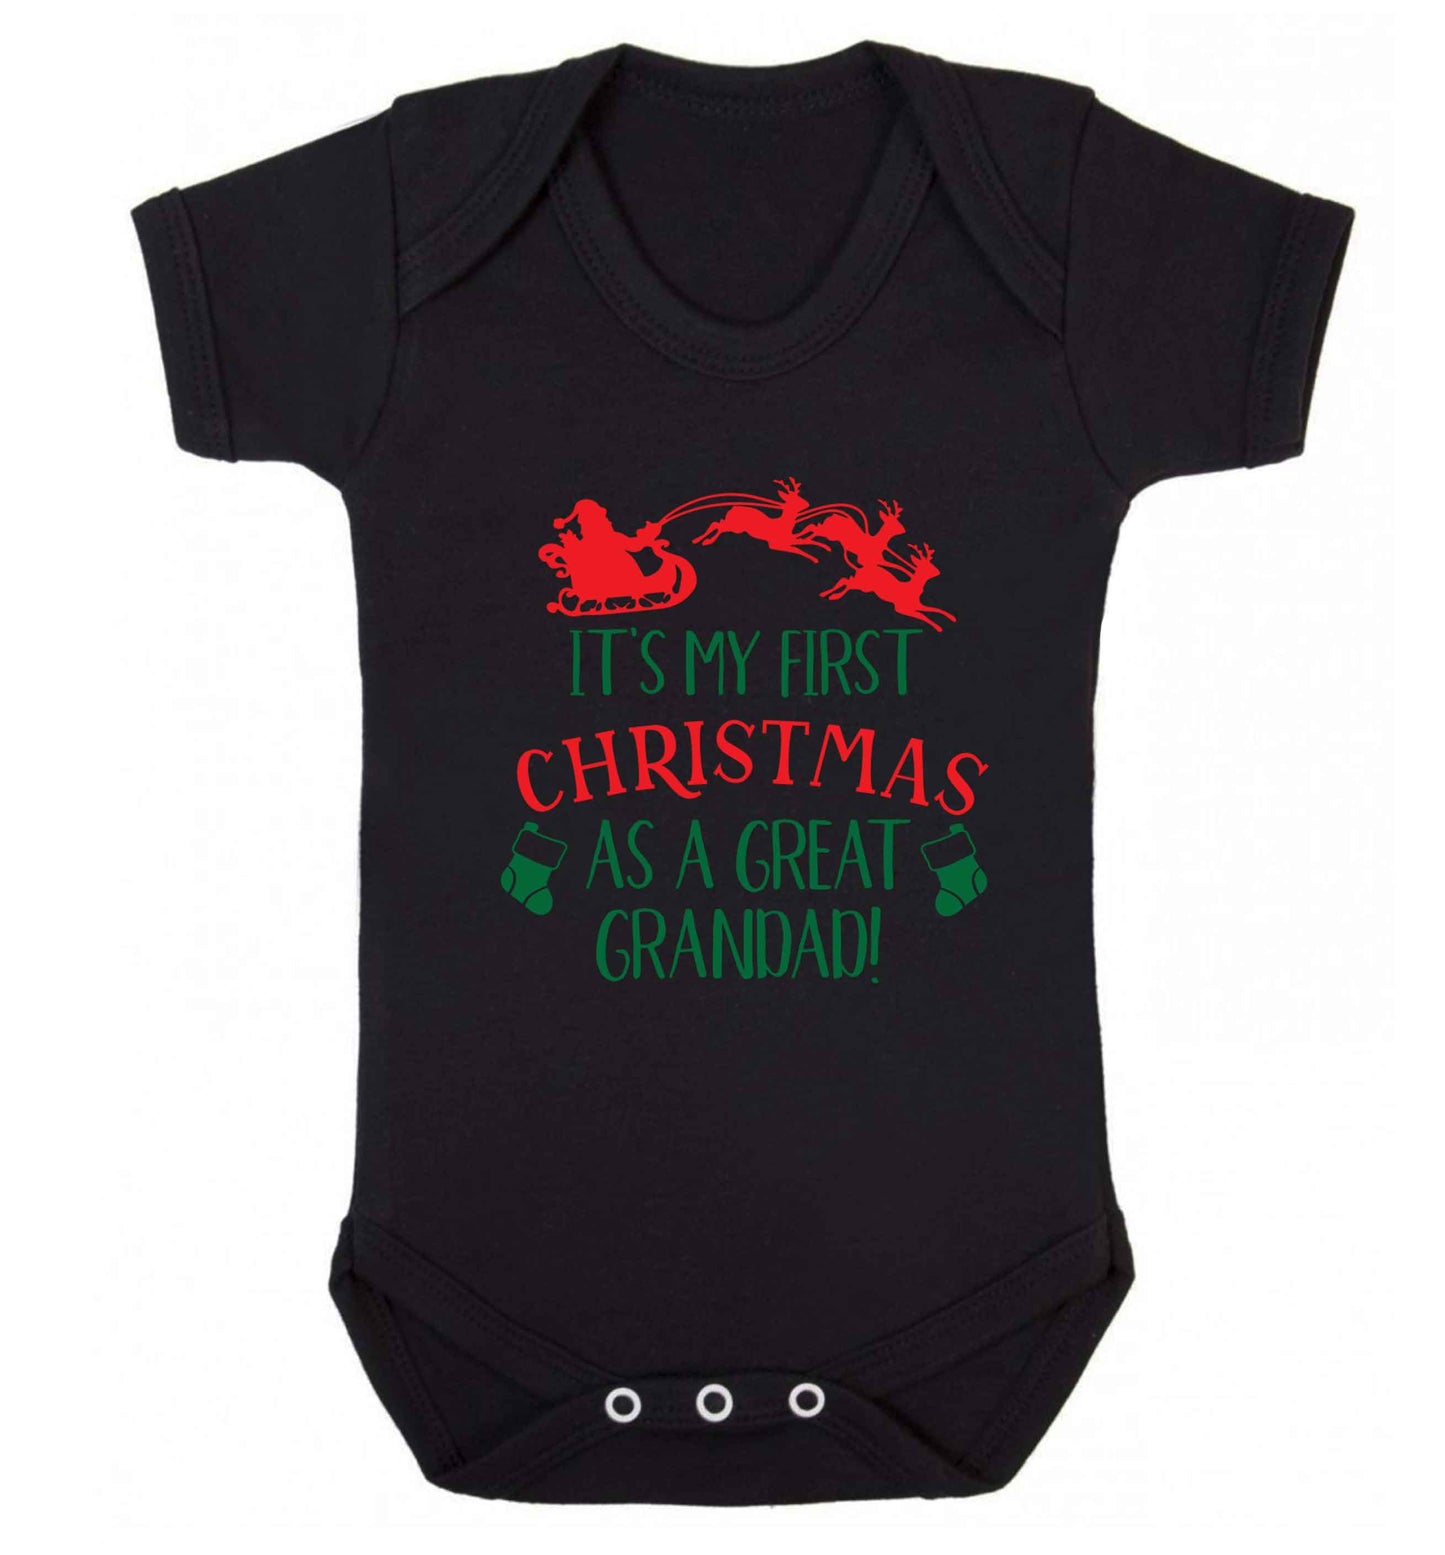 It's my first Christmas as a great grandad! Baby Vest black 18-24 months